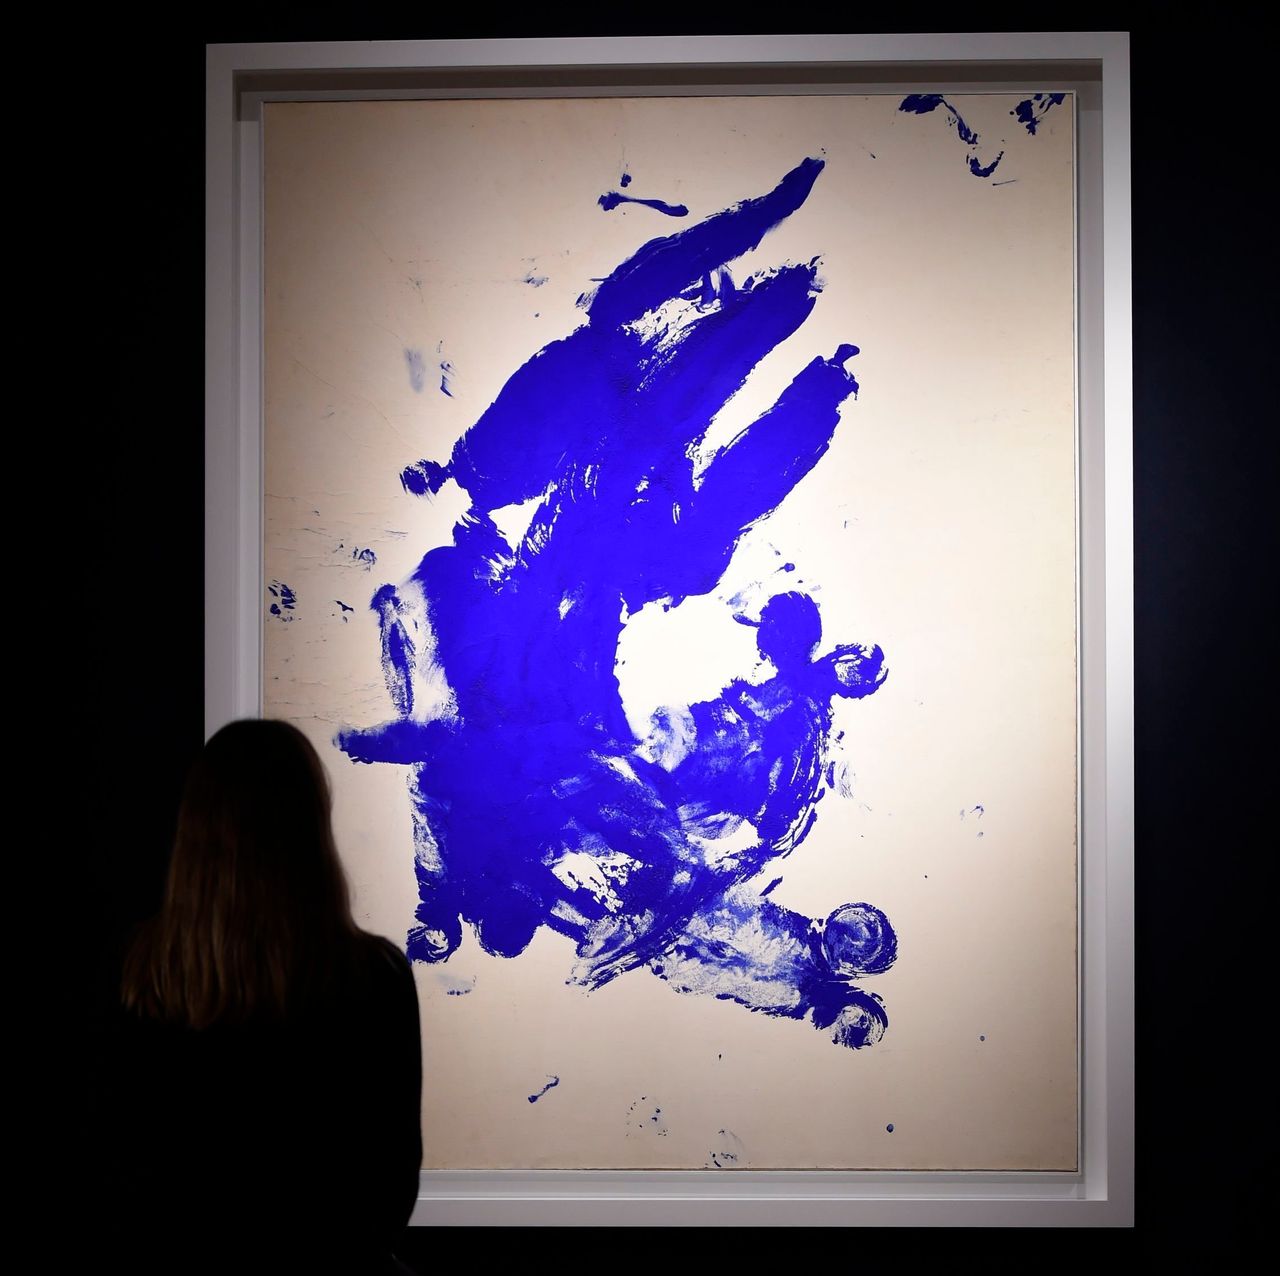 A woman looks at "Anthropometrie sans titre (Untitled Anthropometry)" by Yves Klein at Christie's in London.